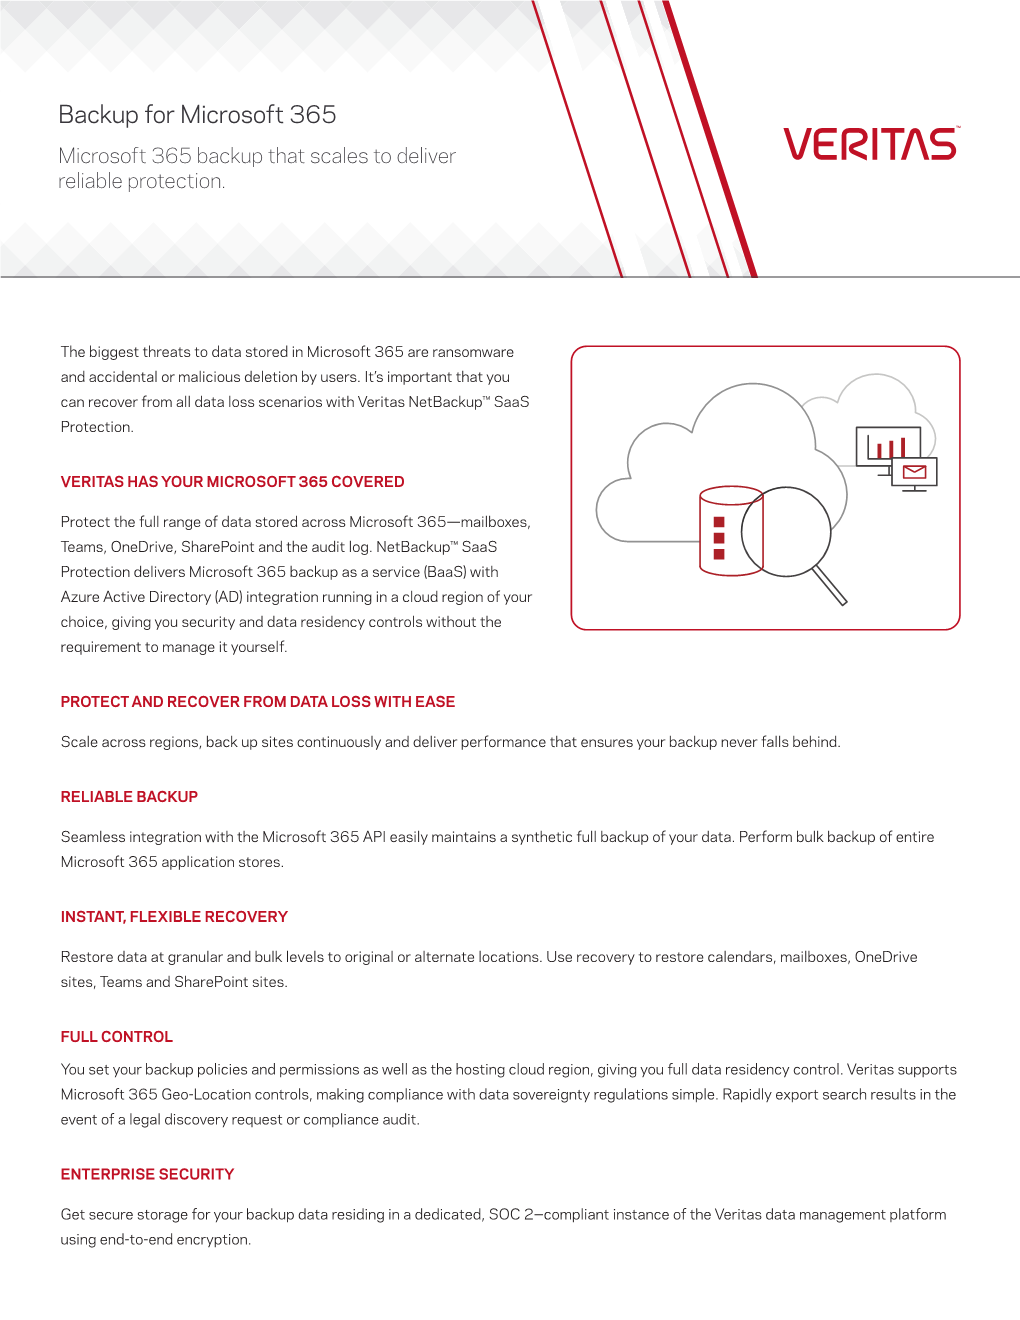 Veritas Backup Exec™ Beats Veeam. Microsoft 365 Backup That Scales to Deliver Reliablesolving Protection